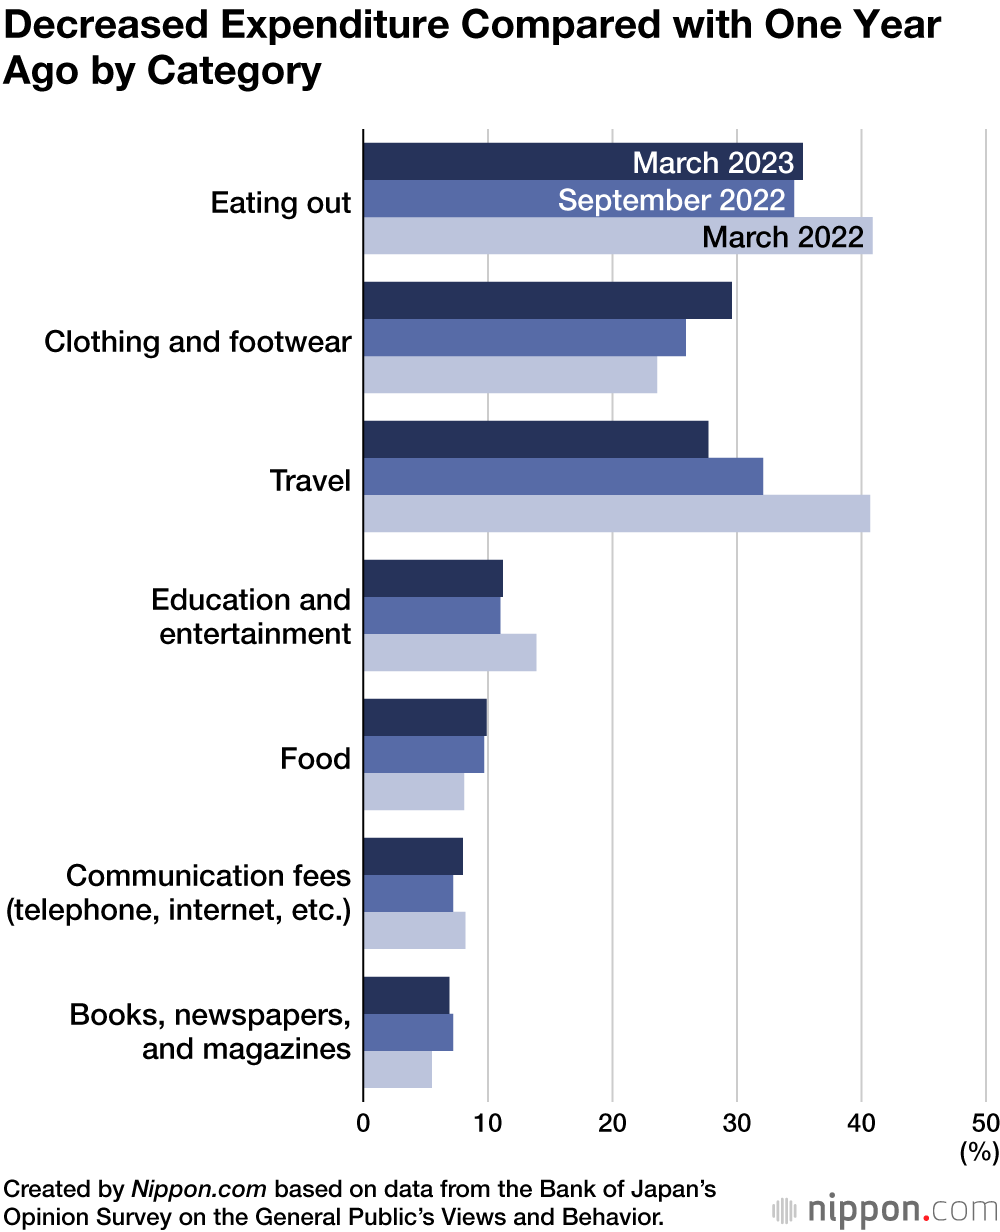 Decreased Expenditure Compared with One Year Ago by Category